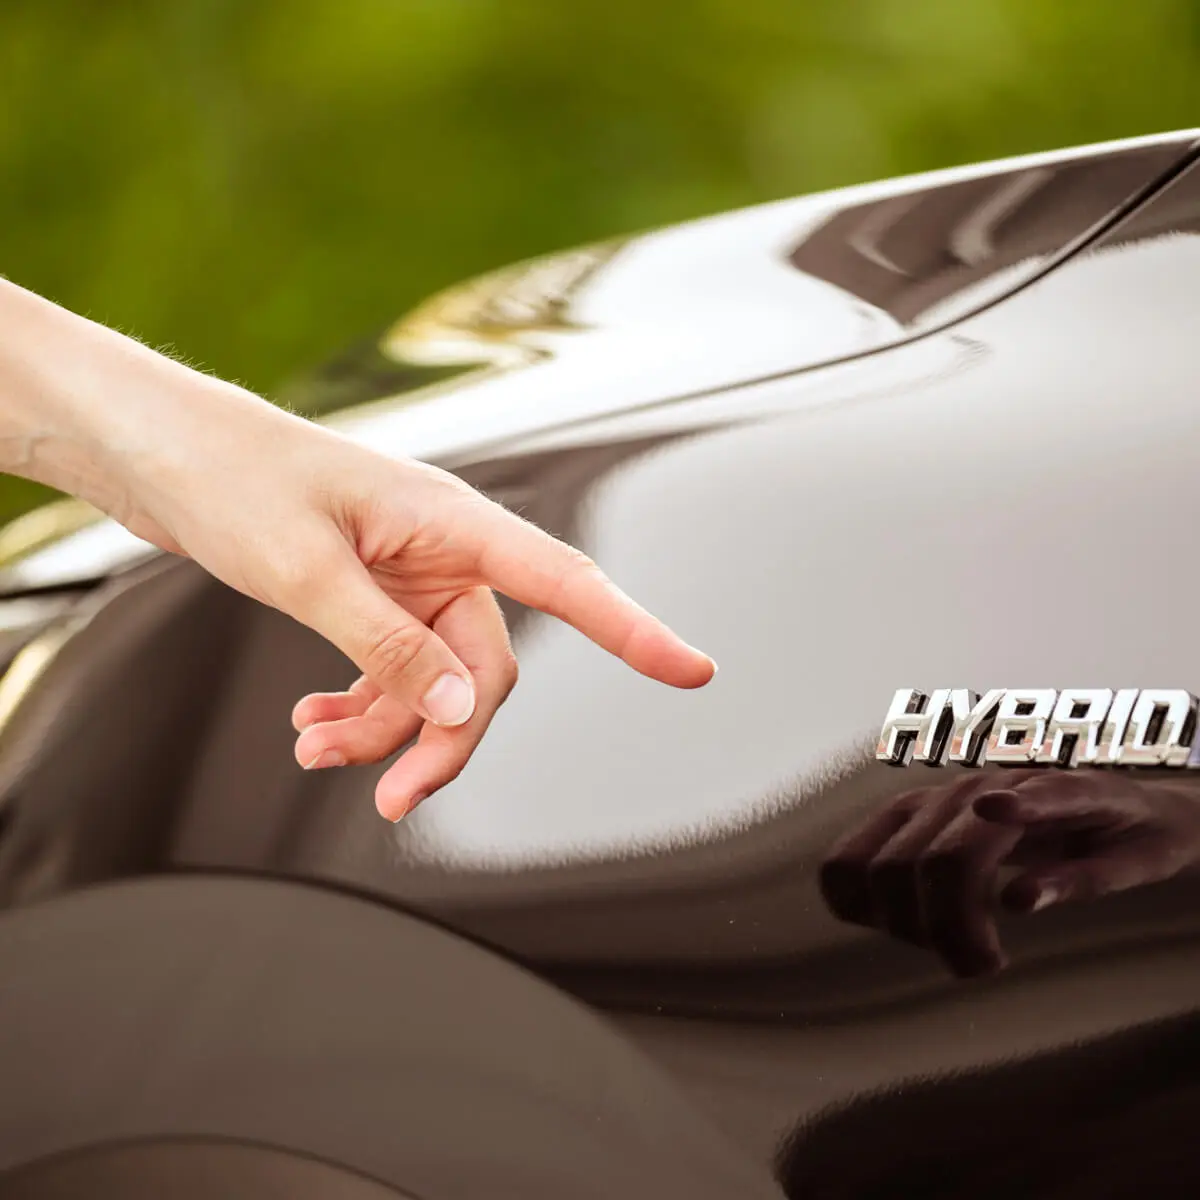 Hand reaches our pointing towards a black hybrid electric vehicle, which has the word 'hybrid' written on it.